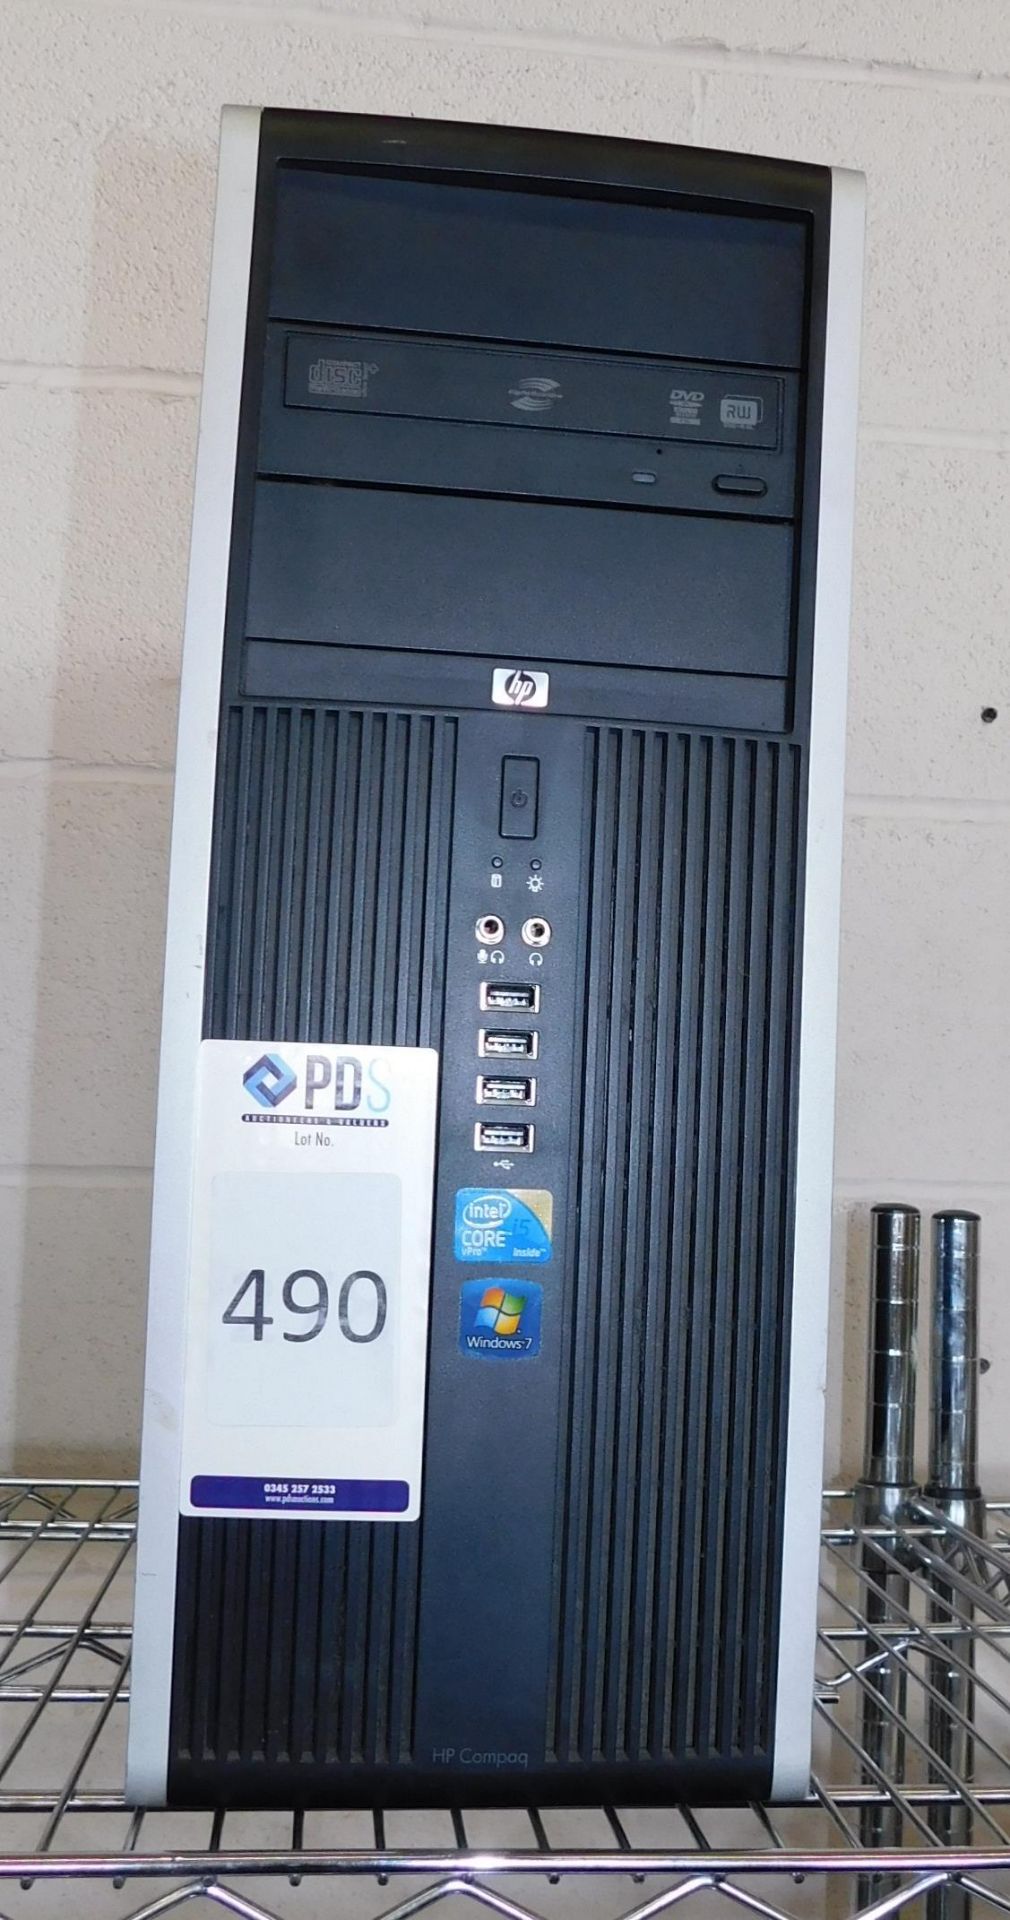 HP Compaq 8100 Elite Convertible Minitower, i5 (No HDD) (Location Stockport. Please Refer to General